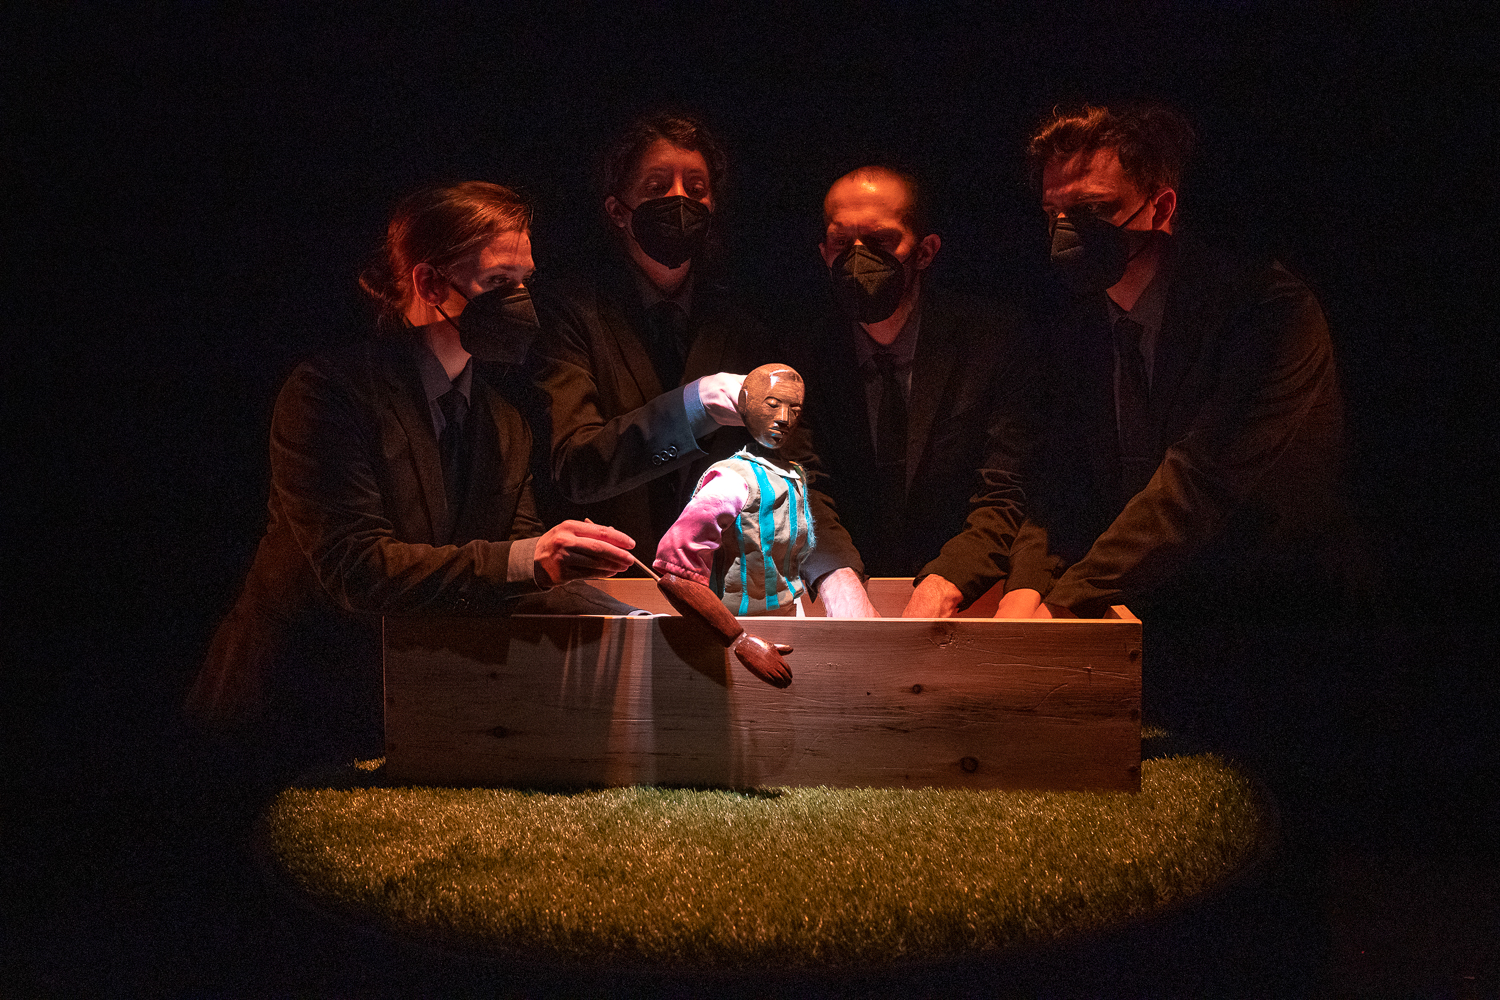 Image from "Fly Away" puppet in a box surrounded by puppeteers on a stage